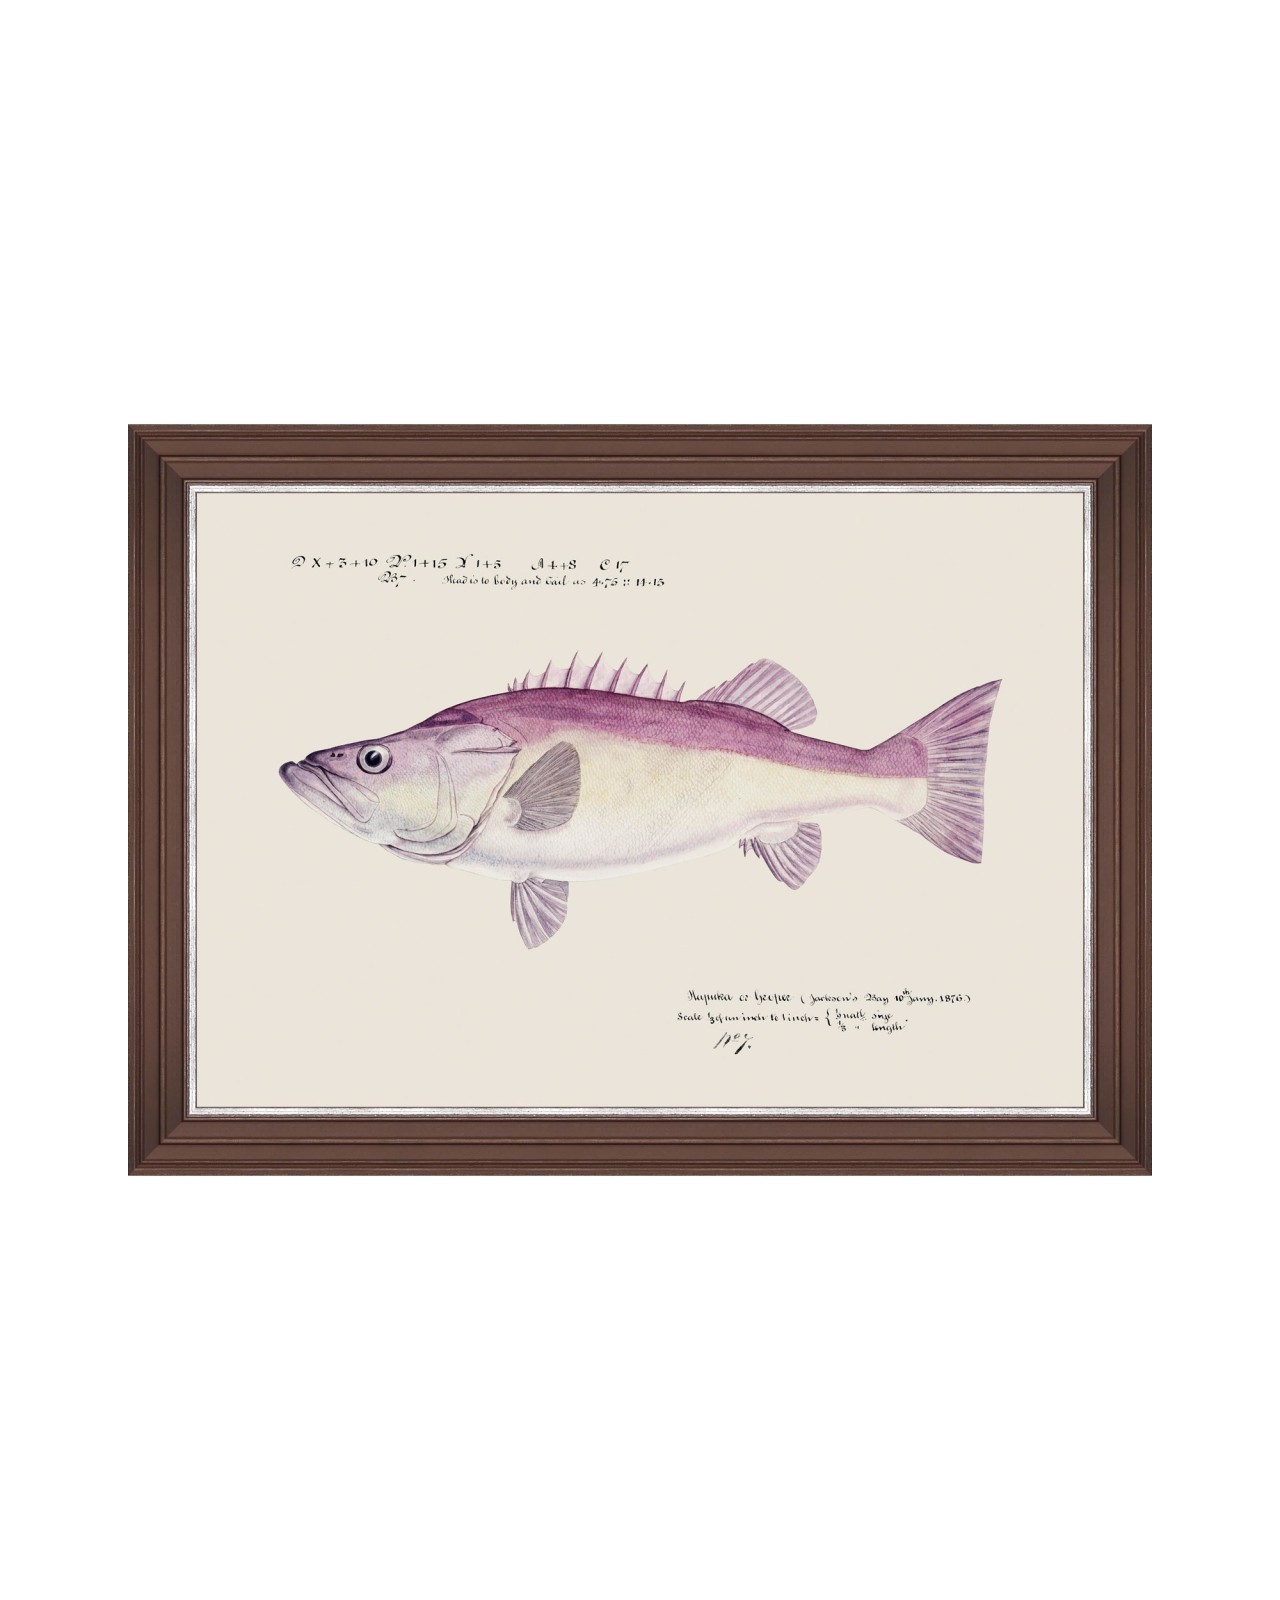 images/productimages/small/mediterraean-fish-grouper-by-f-clark-framed-art-50x35cm-fa13300.jpg